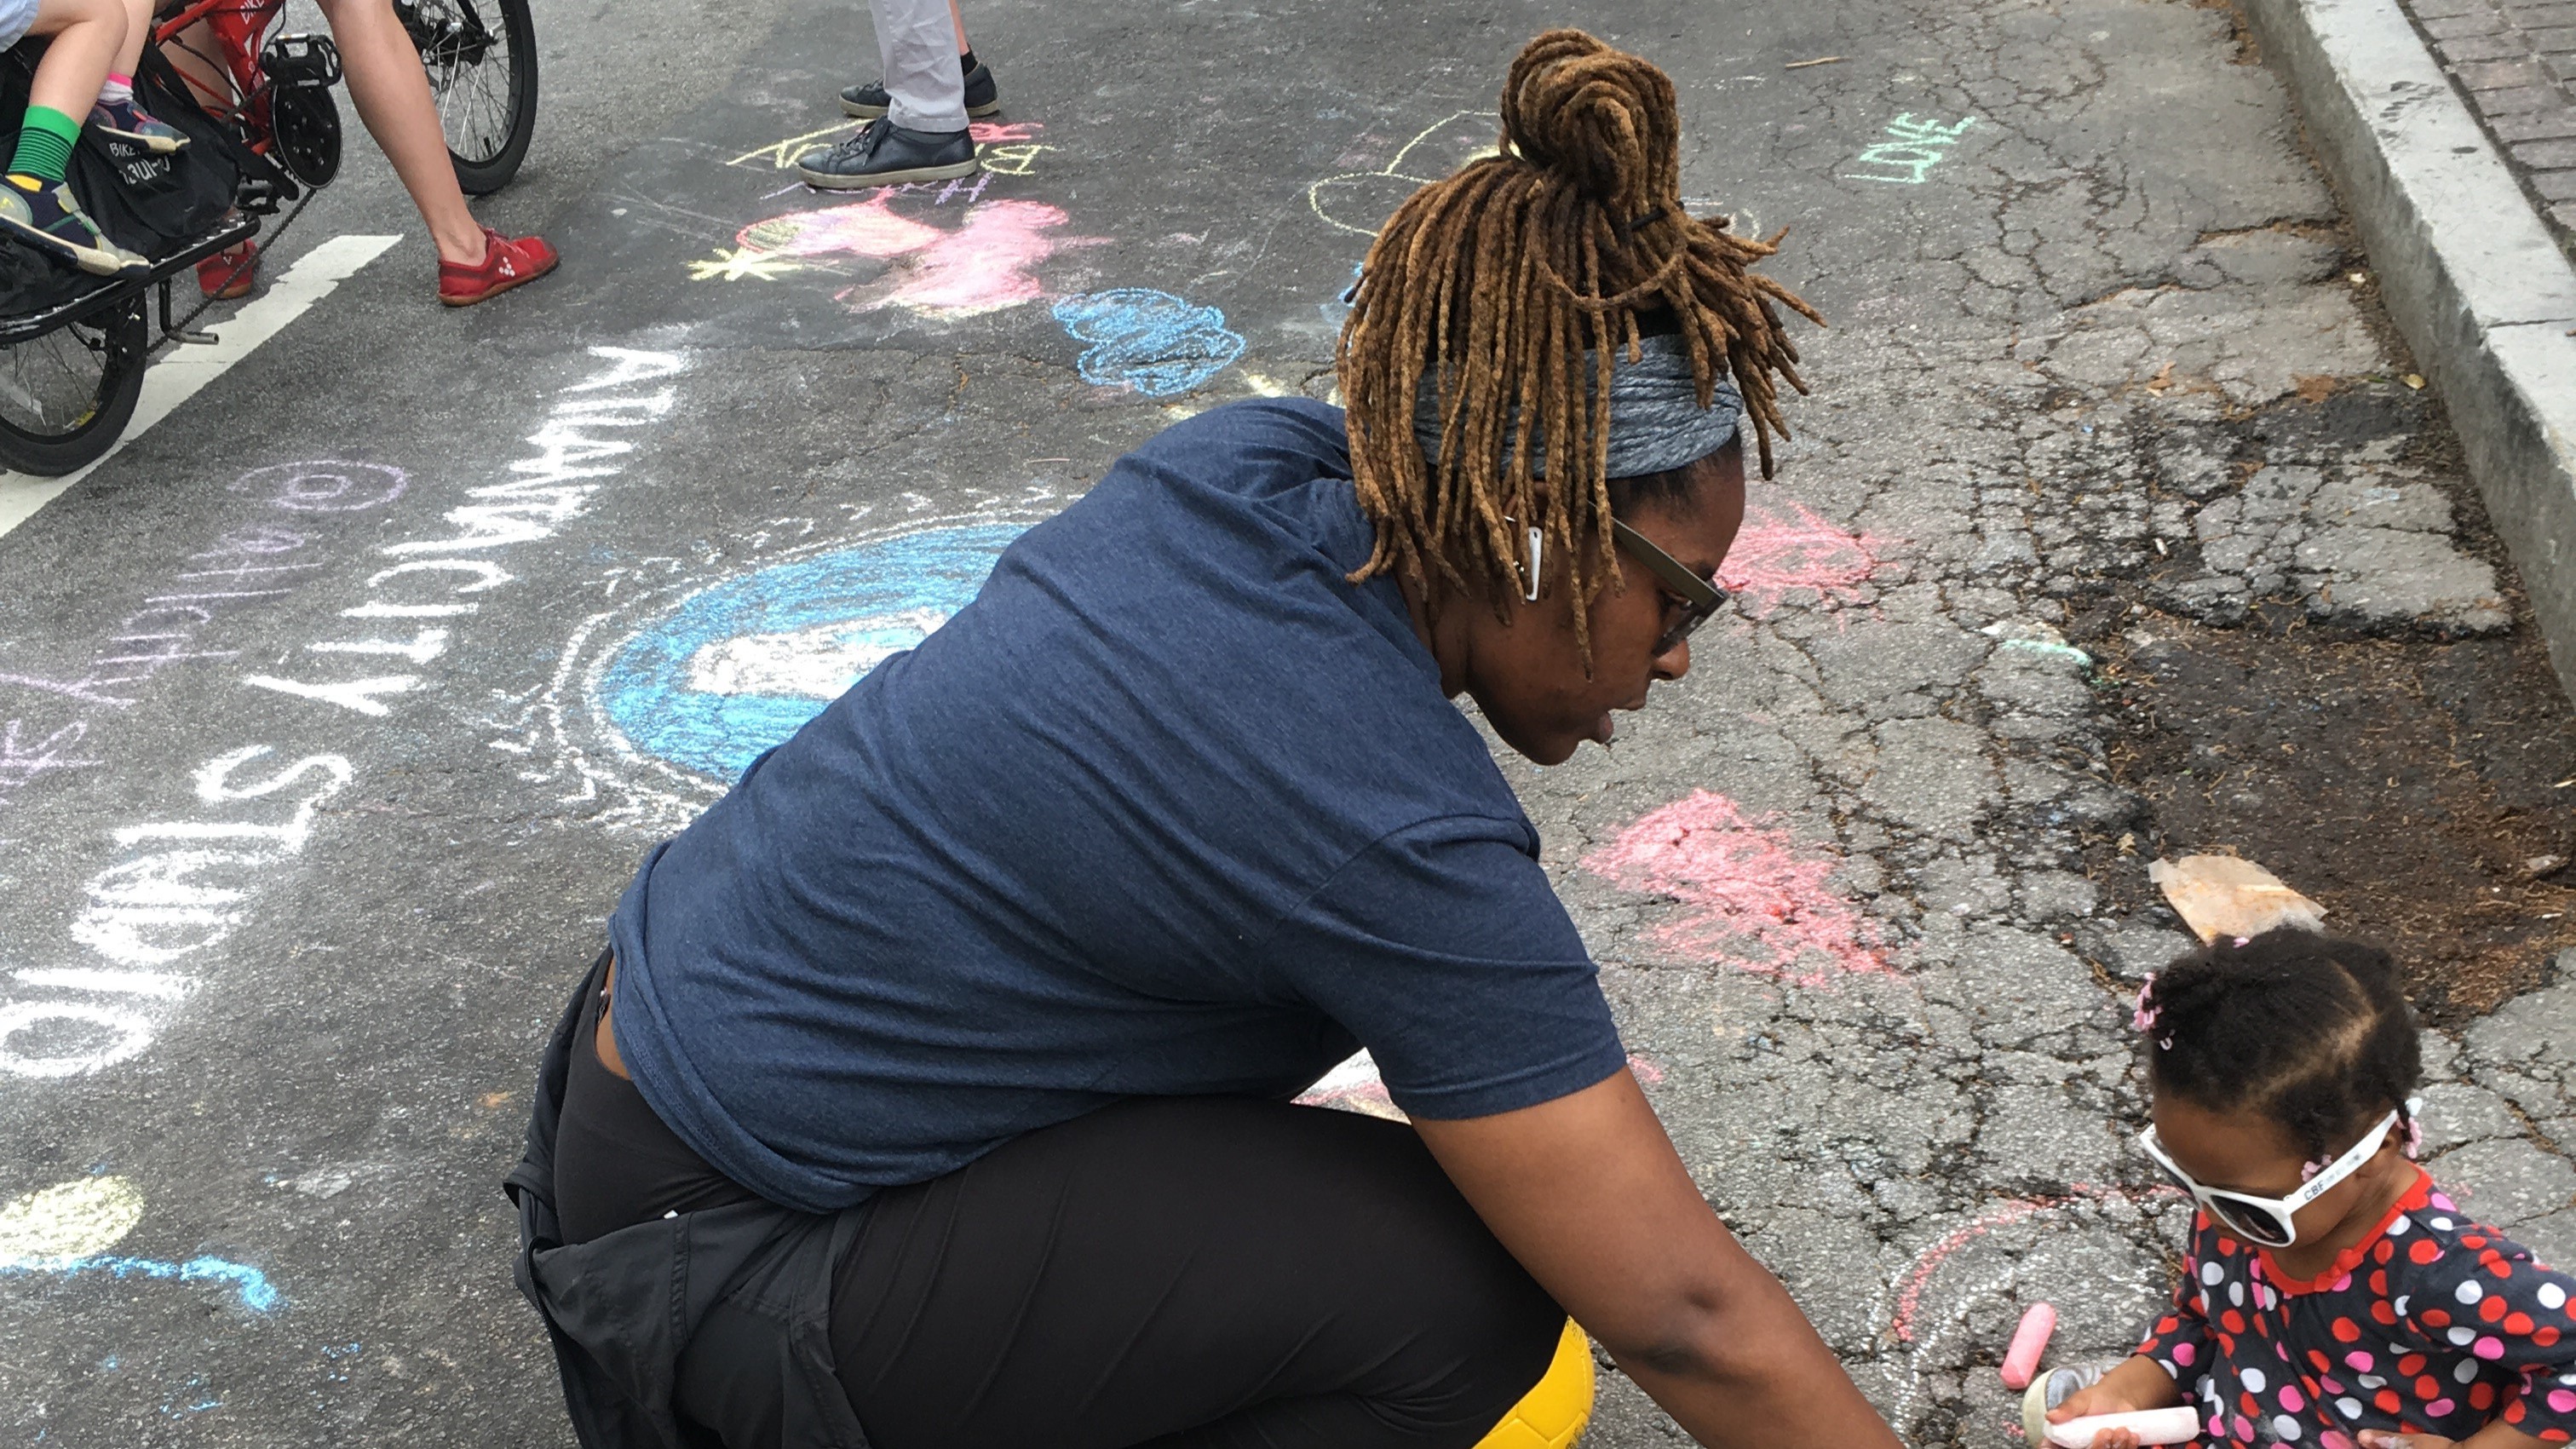 Simone Heath engaging with her community during the Peachtree Atlanta Streets Alive event. Photo provided by Simone Heath.